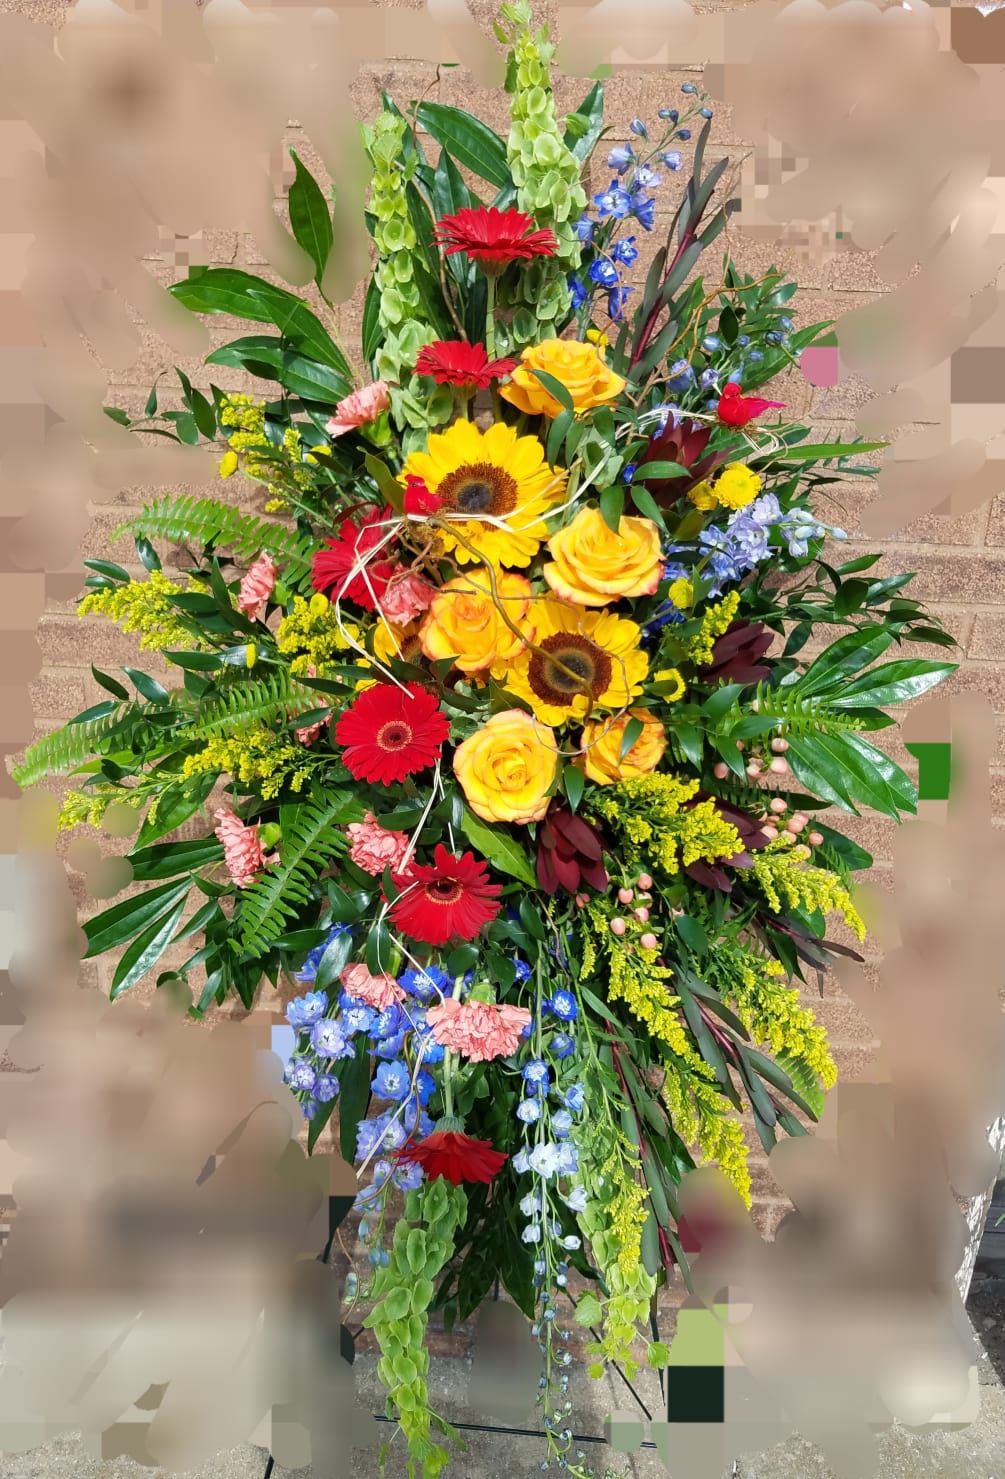 This easel spray is filled with the season&#039;s finest flowers.
*Flowers and colors